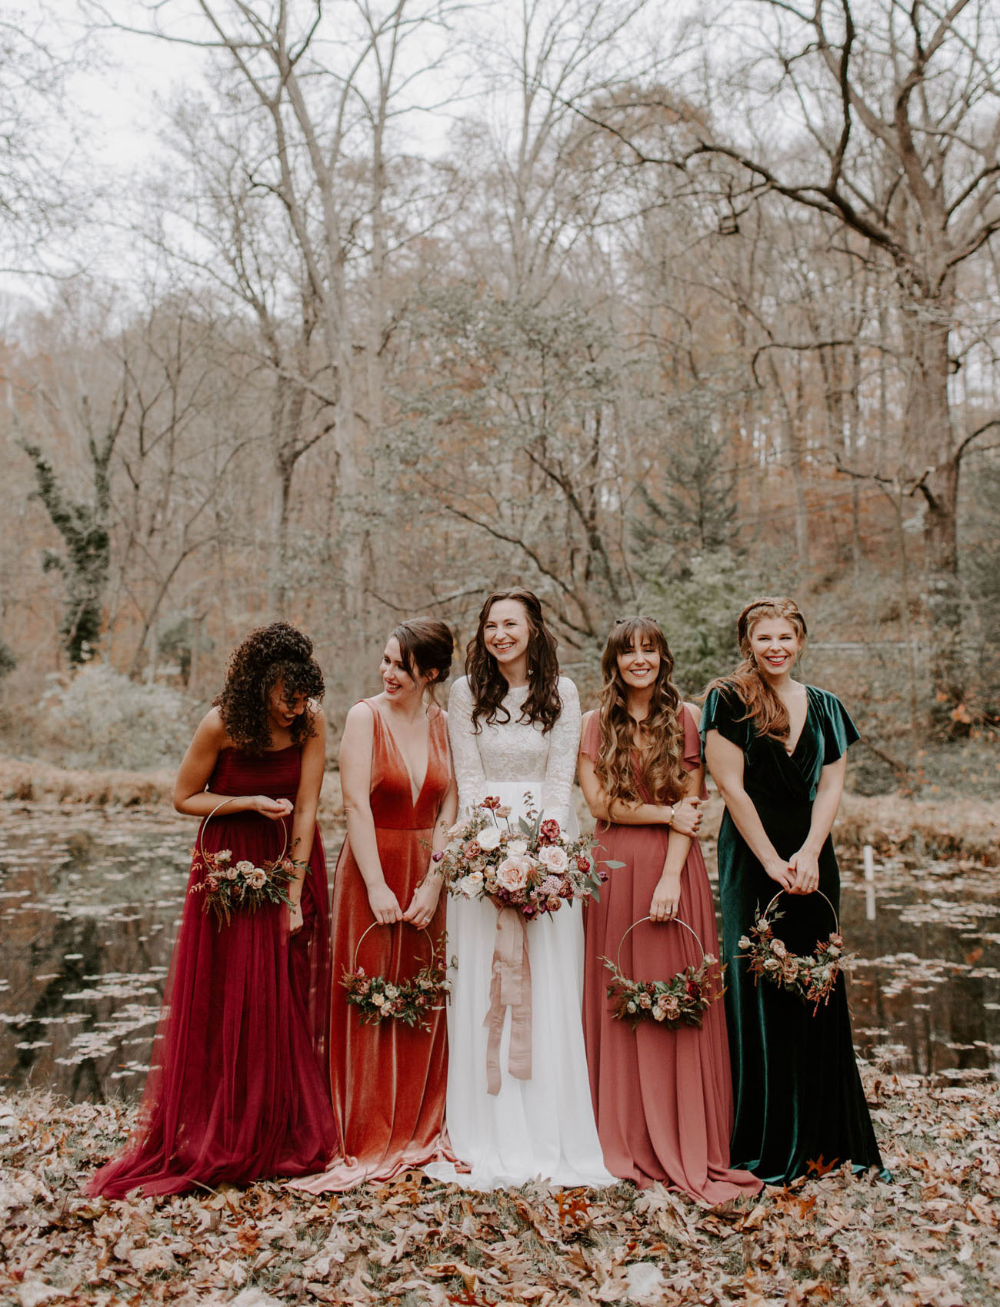 How to Nail the Mismatched Bridesmaids Look | Green Wedding Shoes -   17 boho wedding Bridesmaids ideas